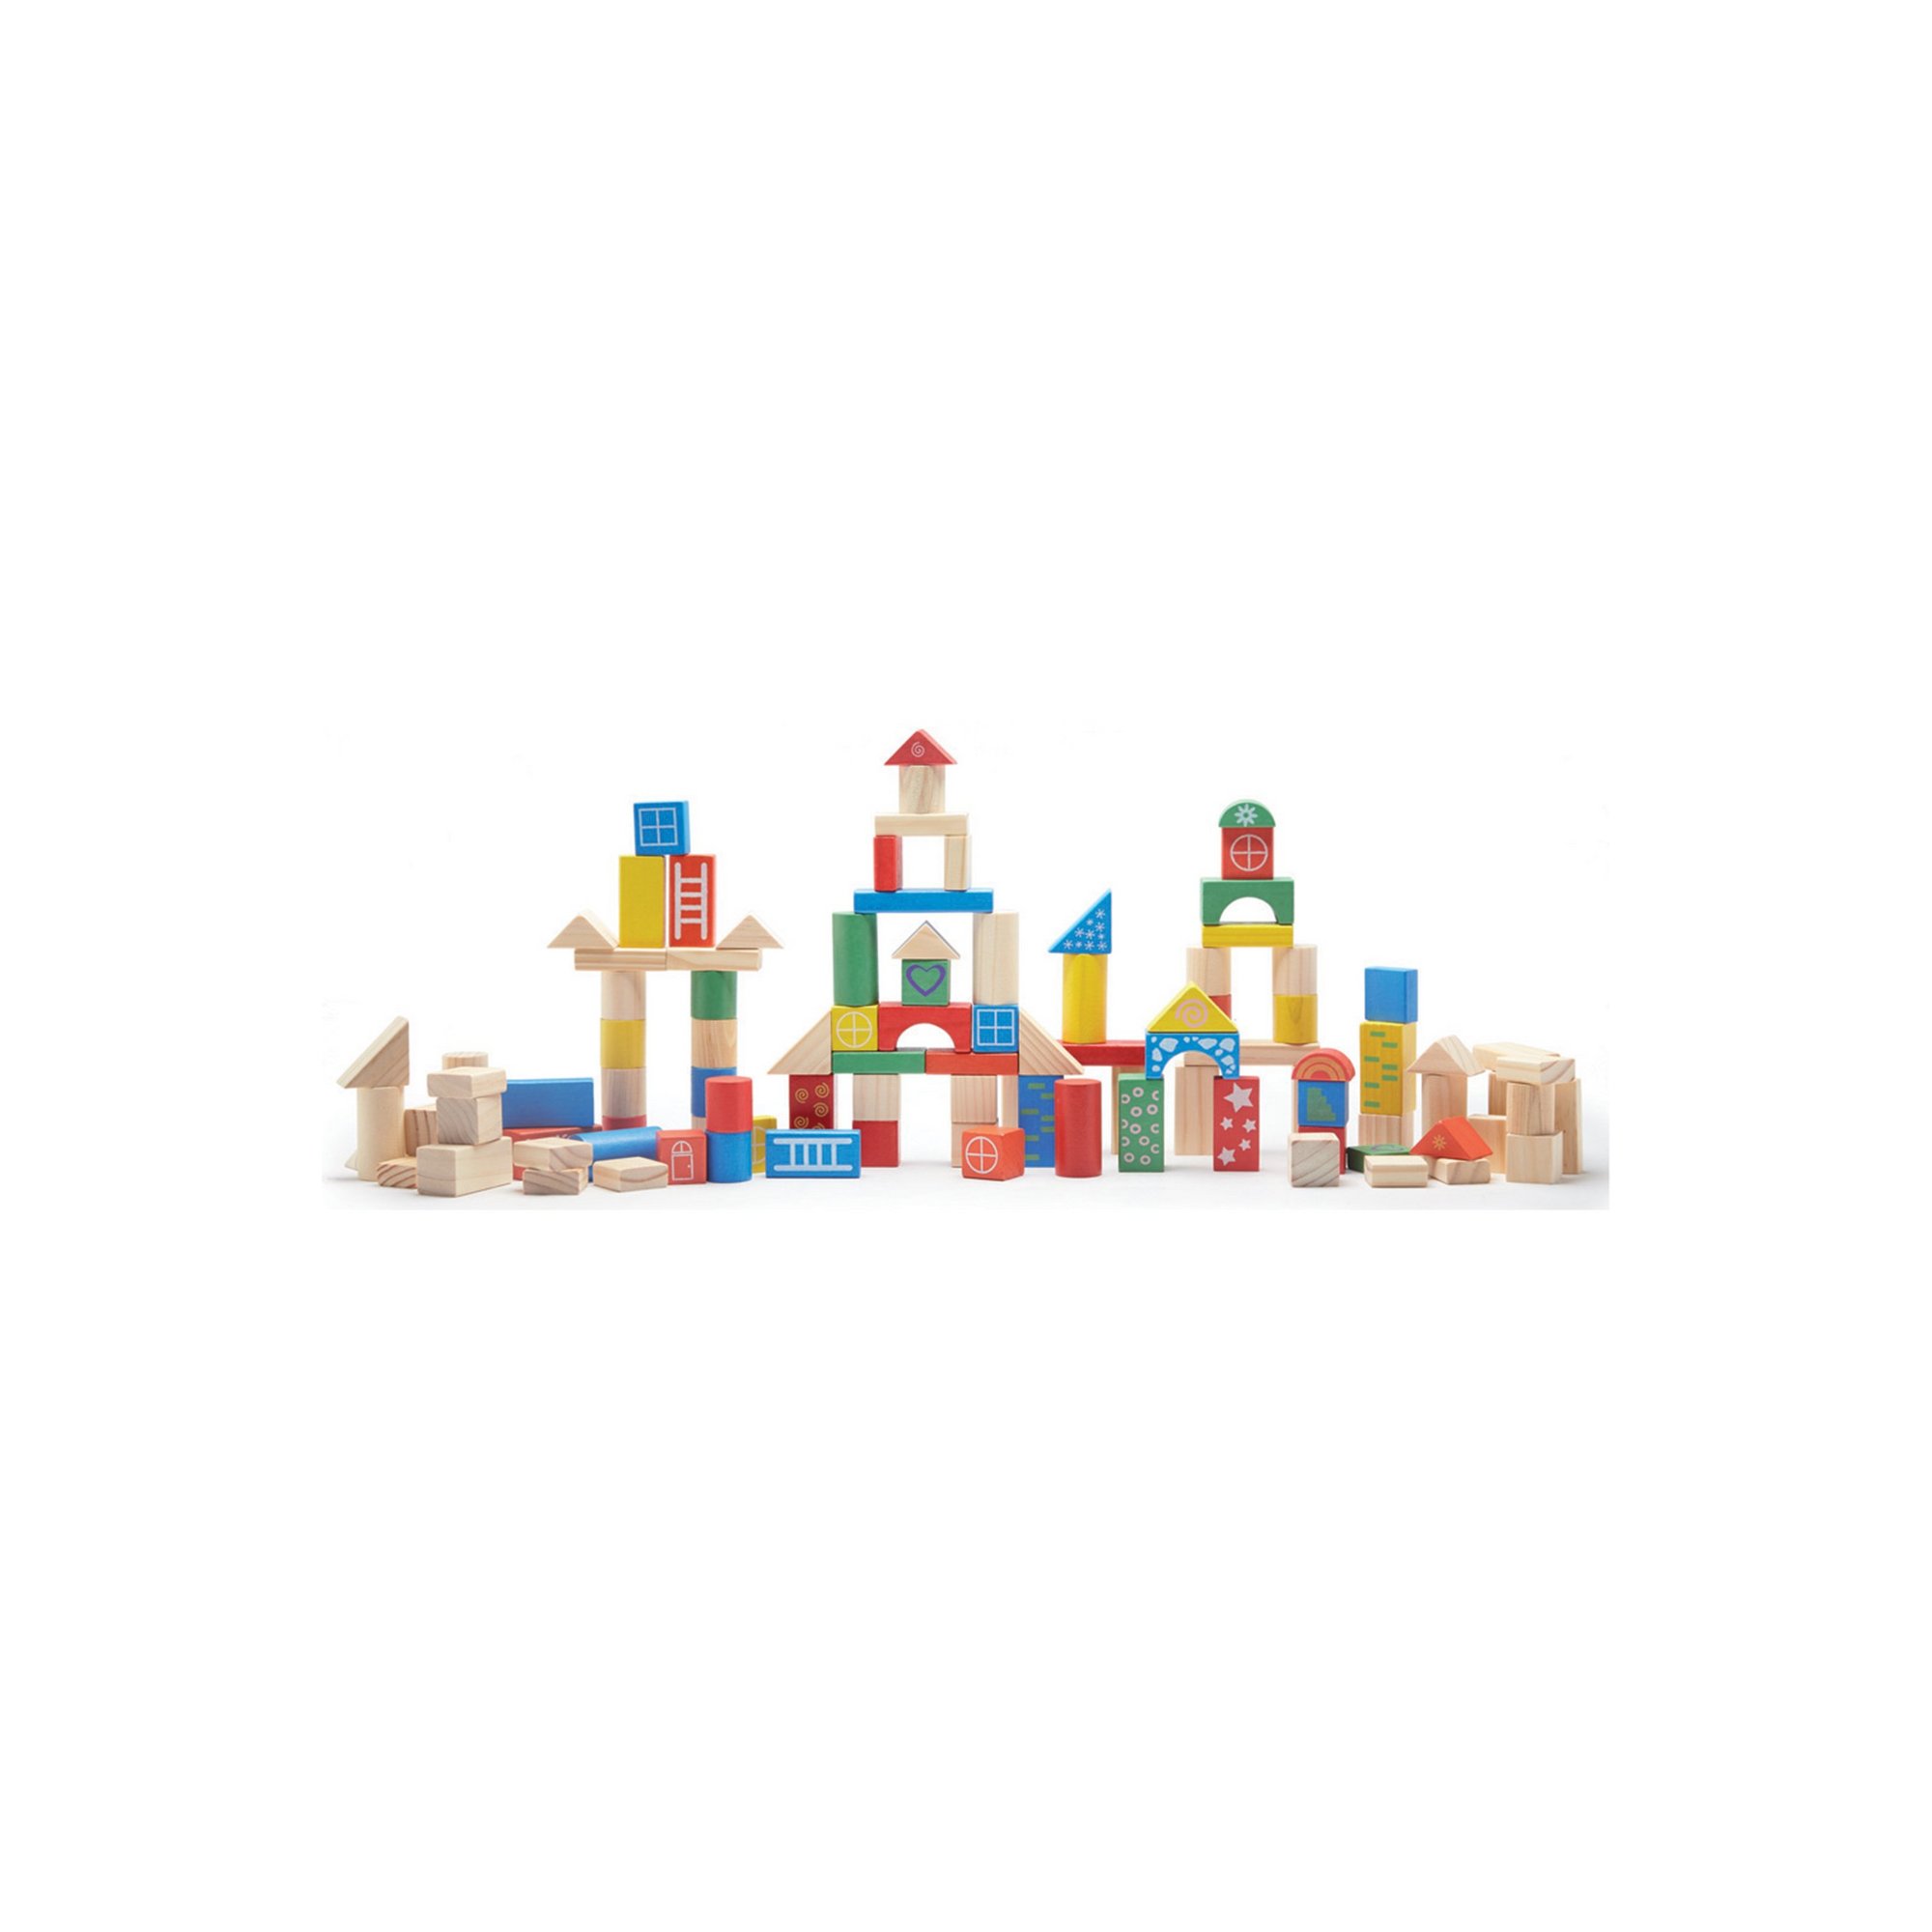 Image of 100 Piece Wooden Blocks with Shape Sorter Lid